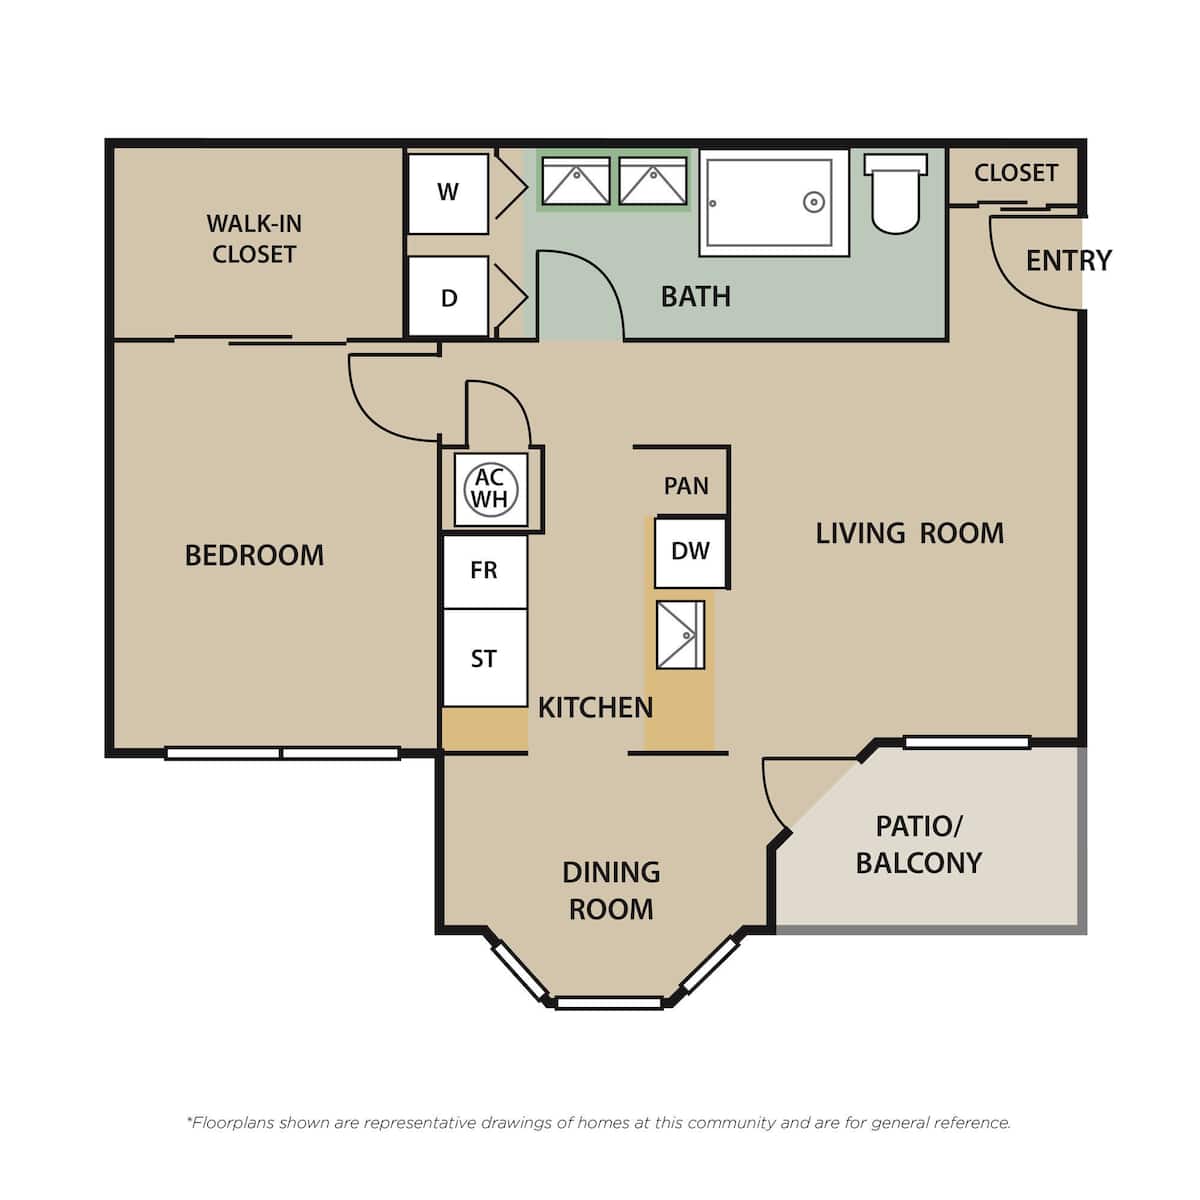 Floorplan diagram for SQUARE A4, showing 1 bedroom